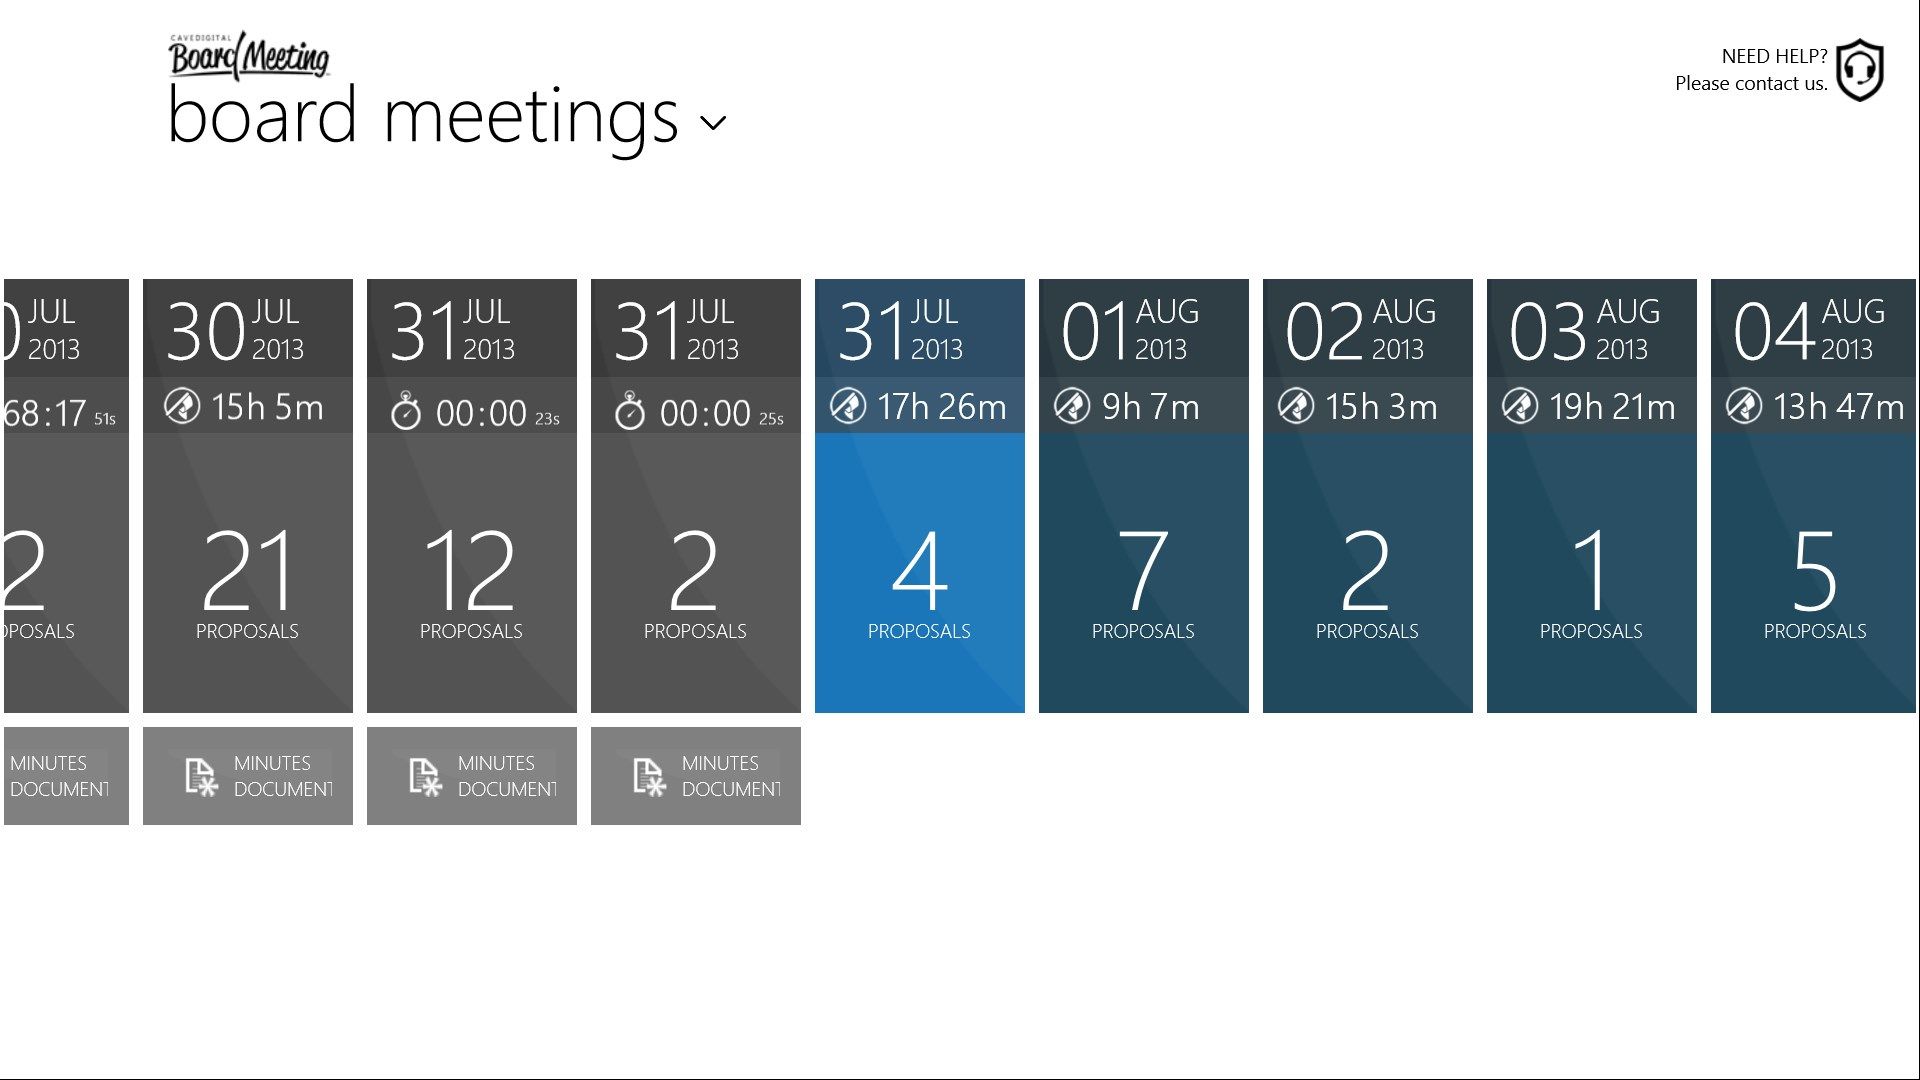 Navigate your board meetings with touch using a natural and intuitive timeline.